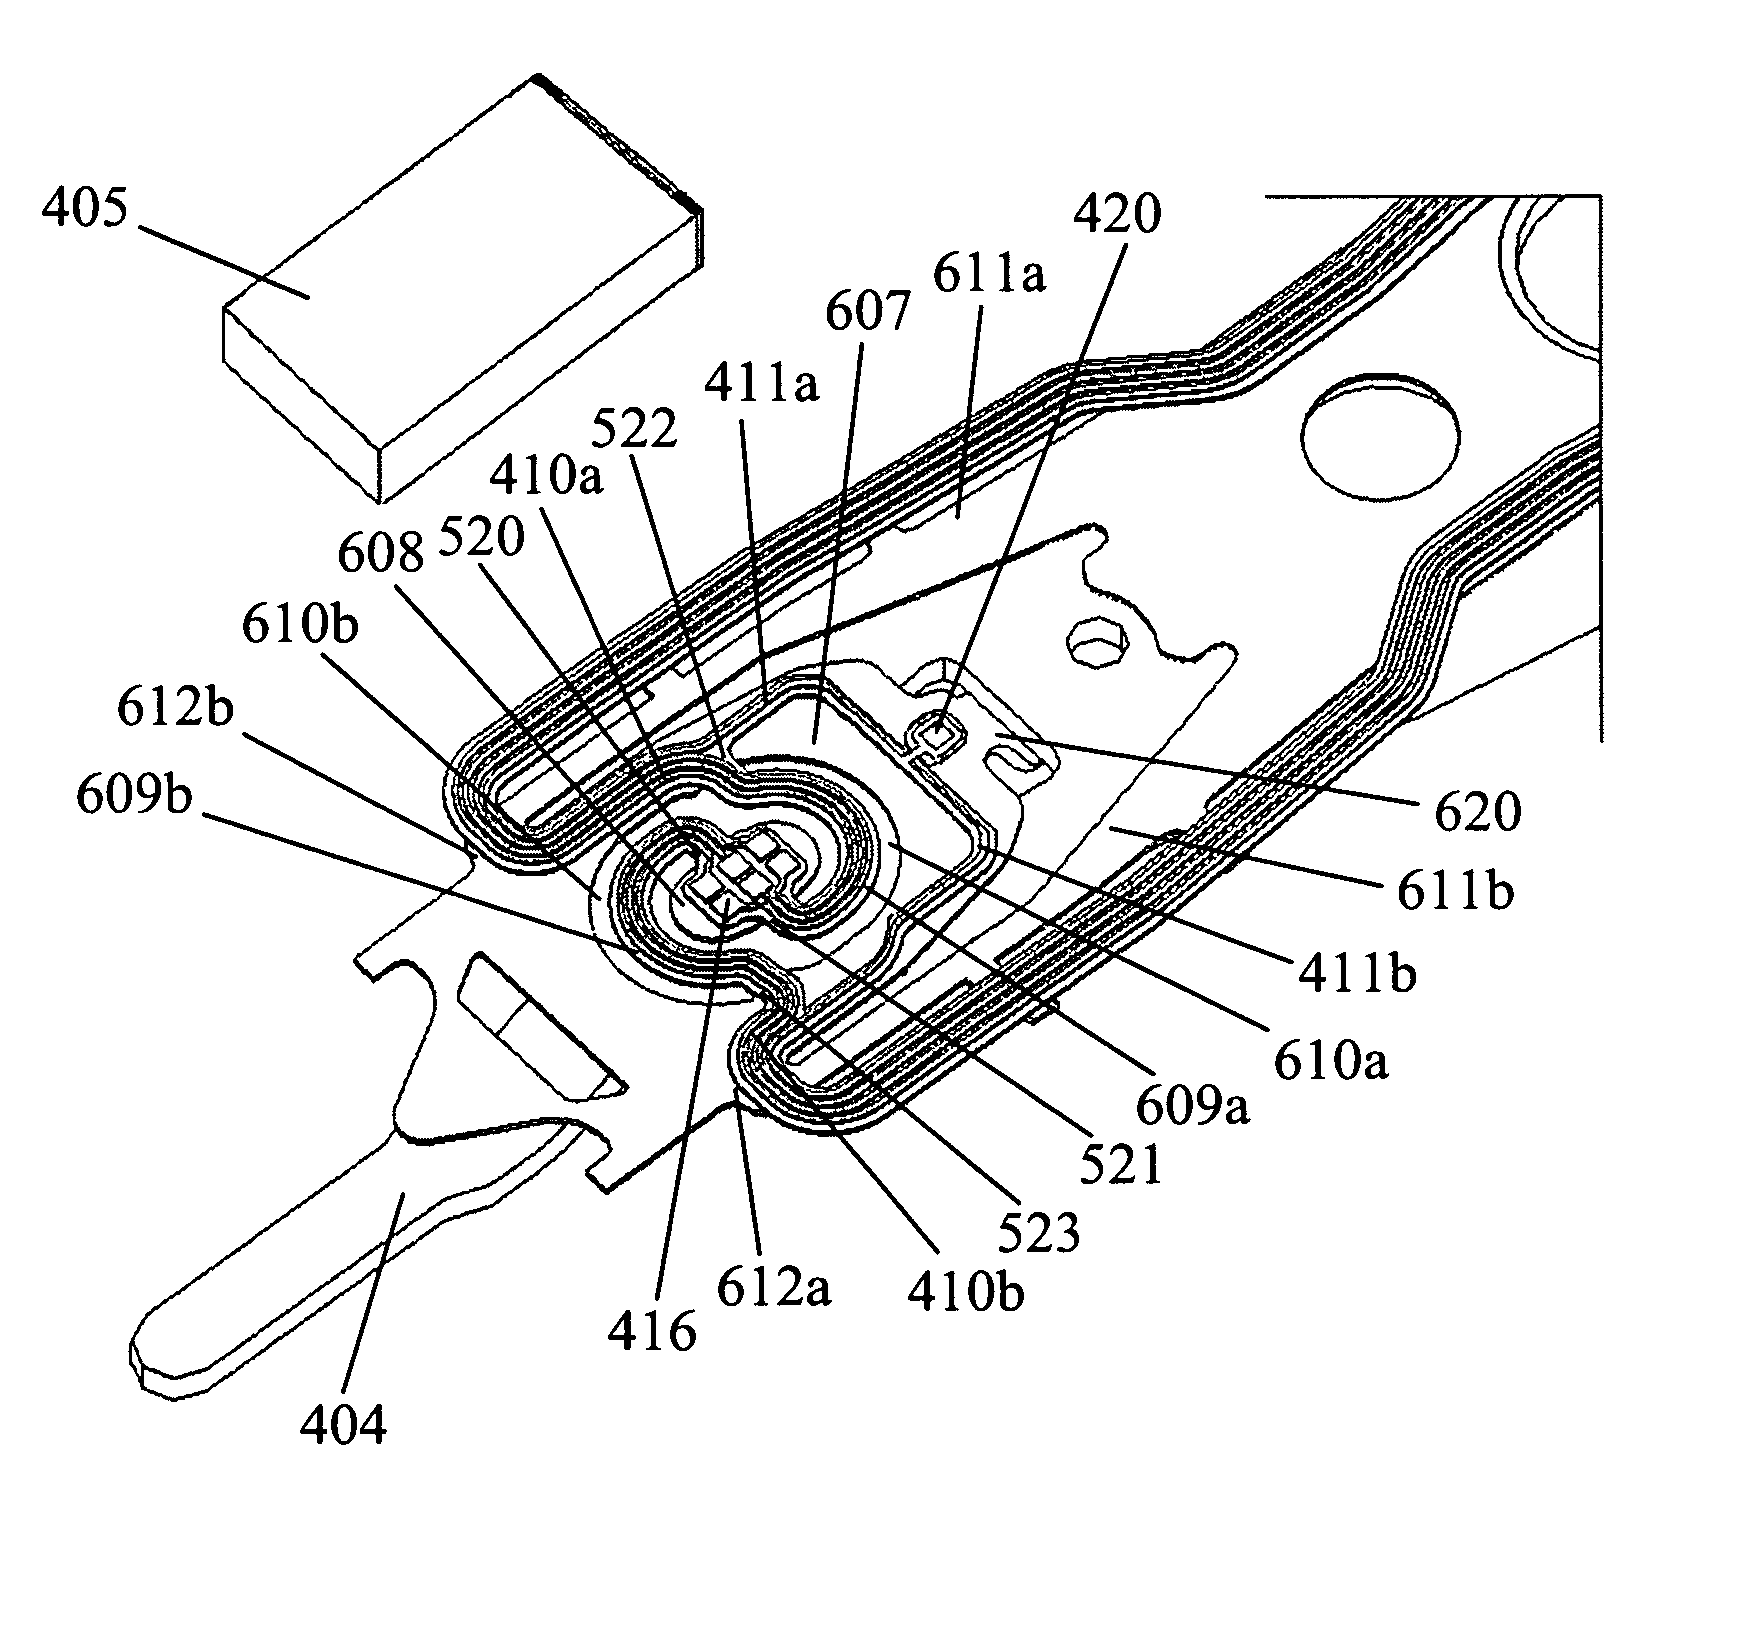 Head gimbal assembly, suspension for the head gimbal assembly, and disk drive unit with the same